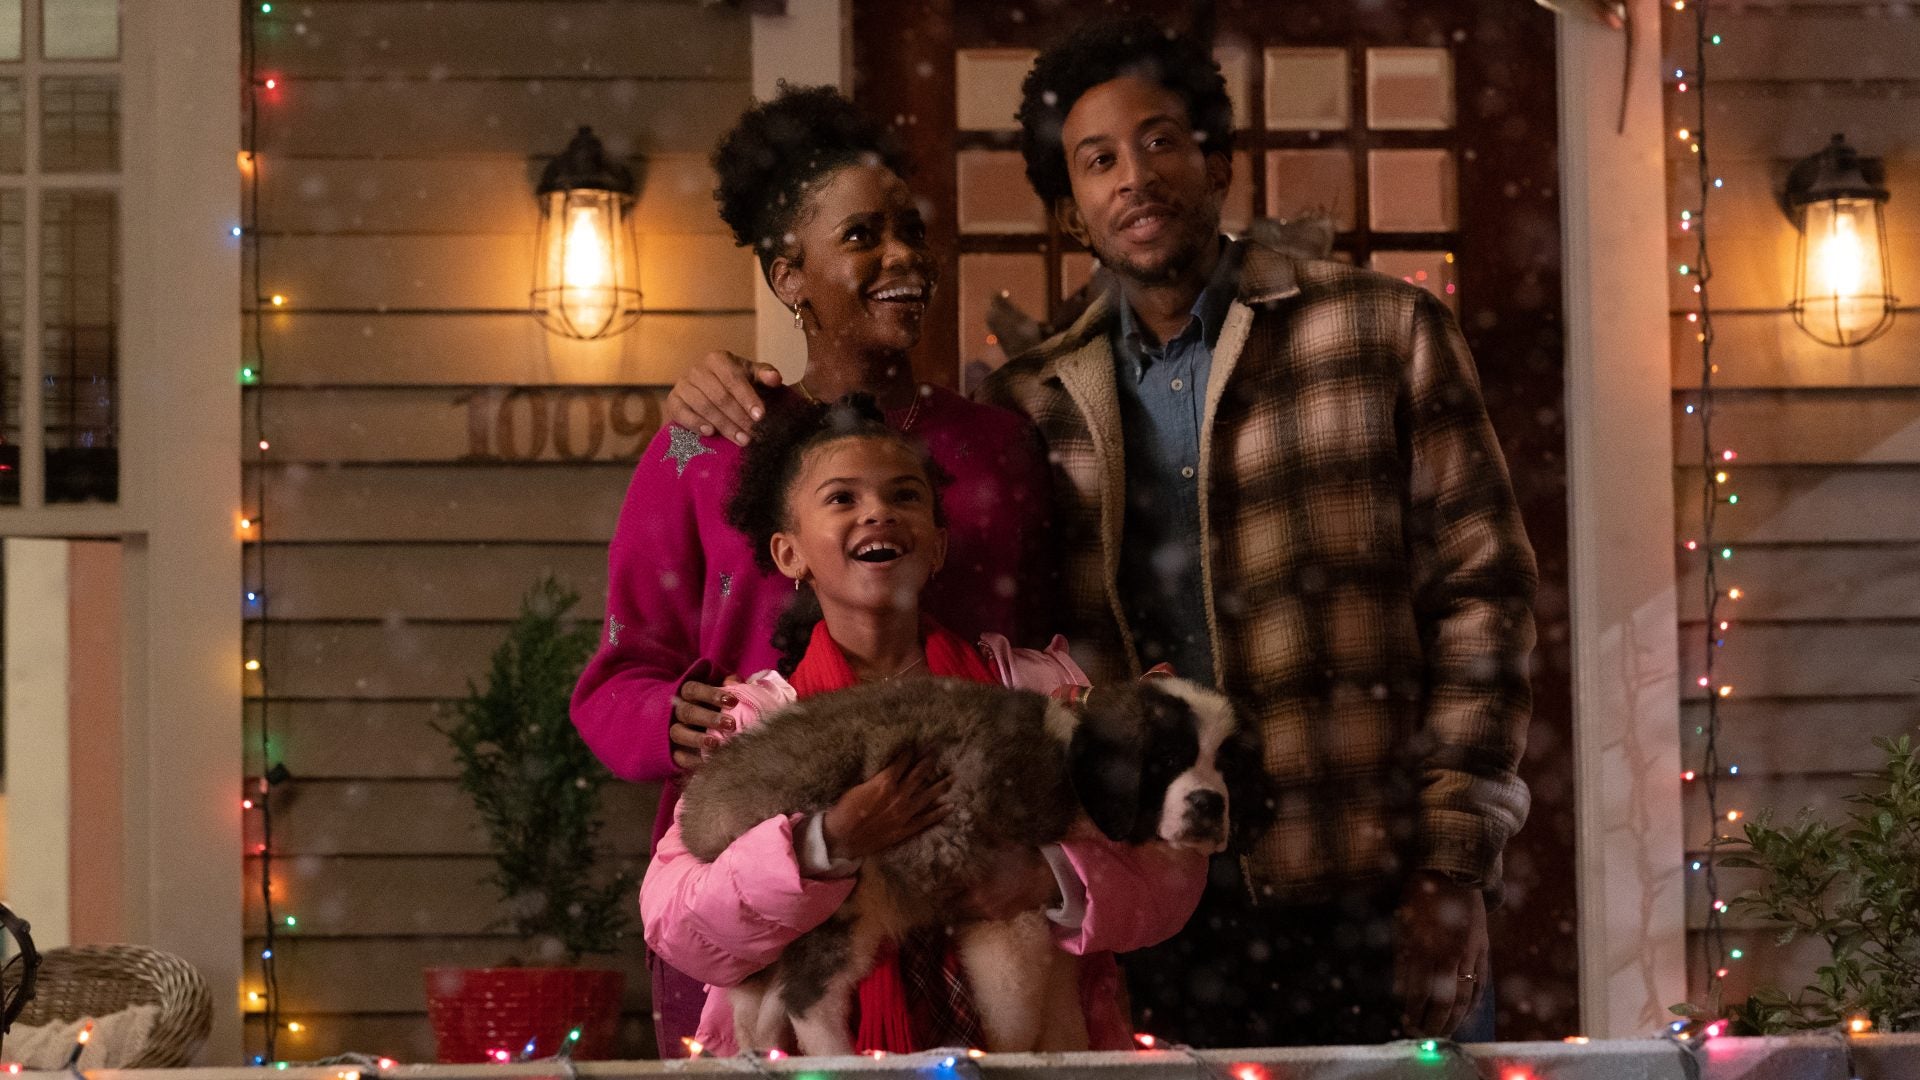 Ludacris, Teyonah Parris And Lil Rel Howery Get Into The Spirit In ‘Dashing Through The Snow’ Trailer